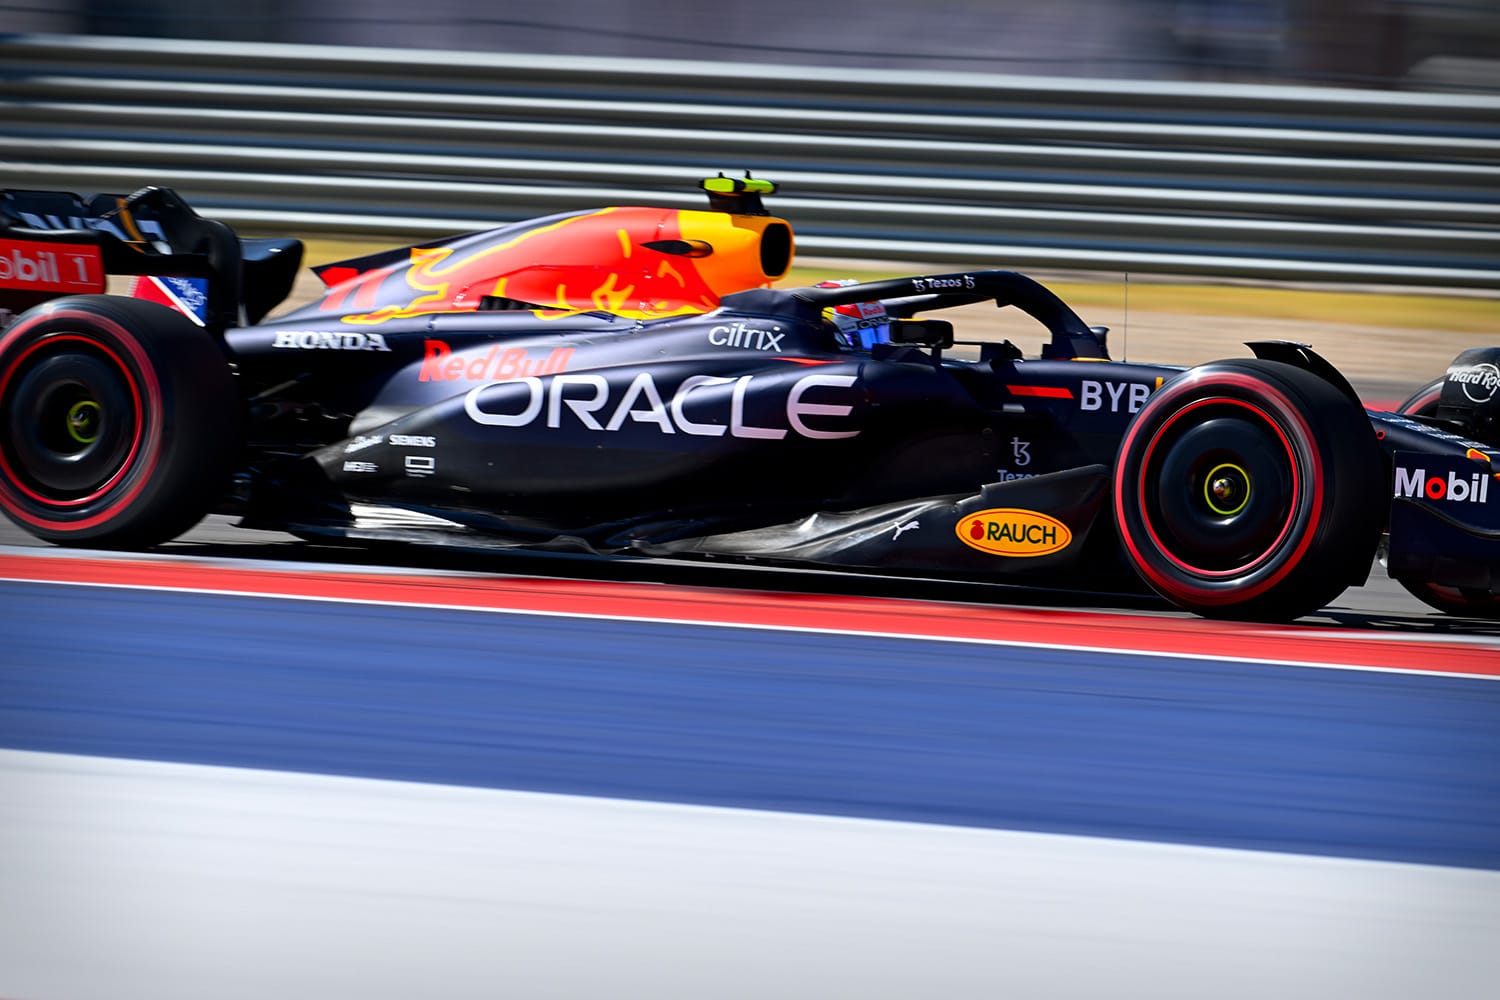 https://frontofficesports.com/wp-content/uploads/2022/12/FOS-22-12.16-F1-Ford-Red-Bull.jpg